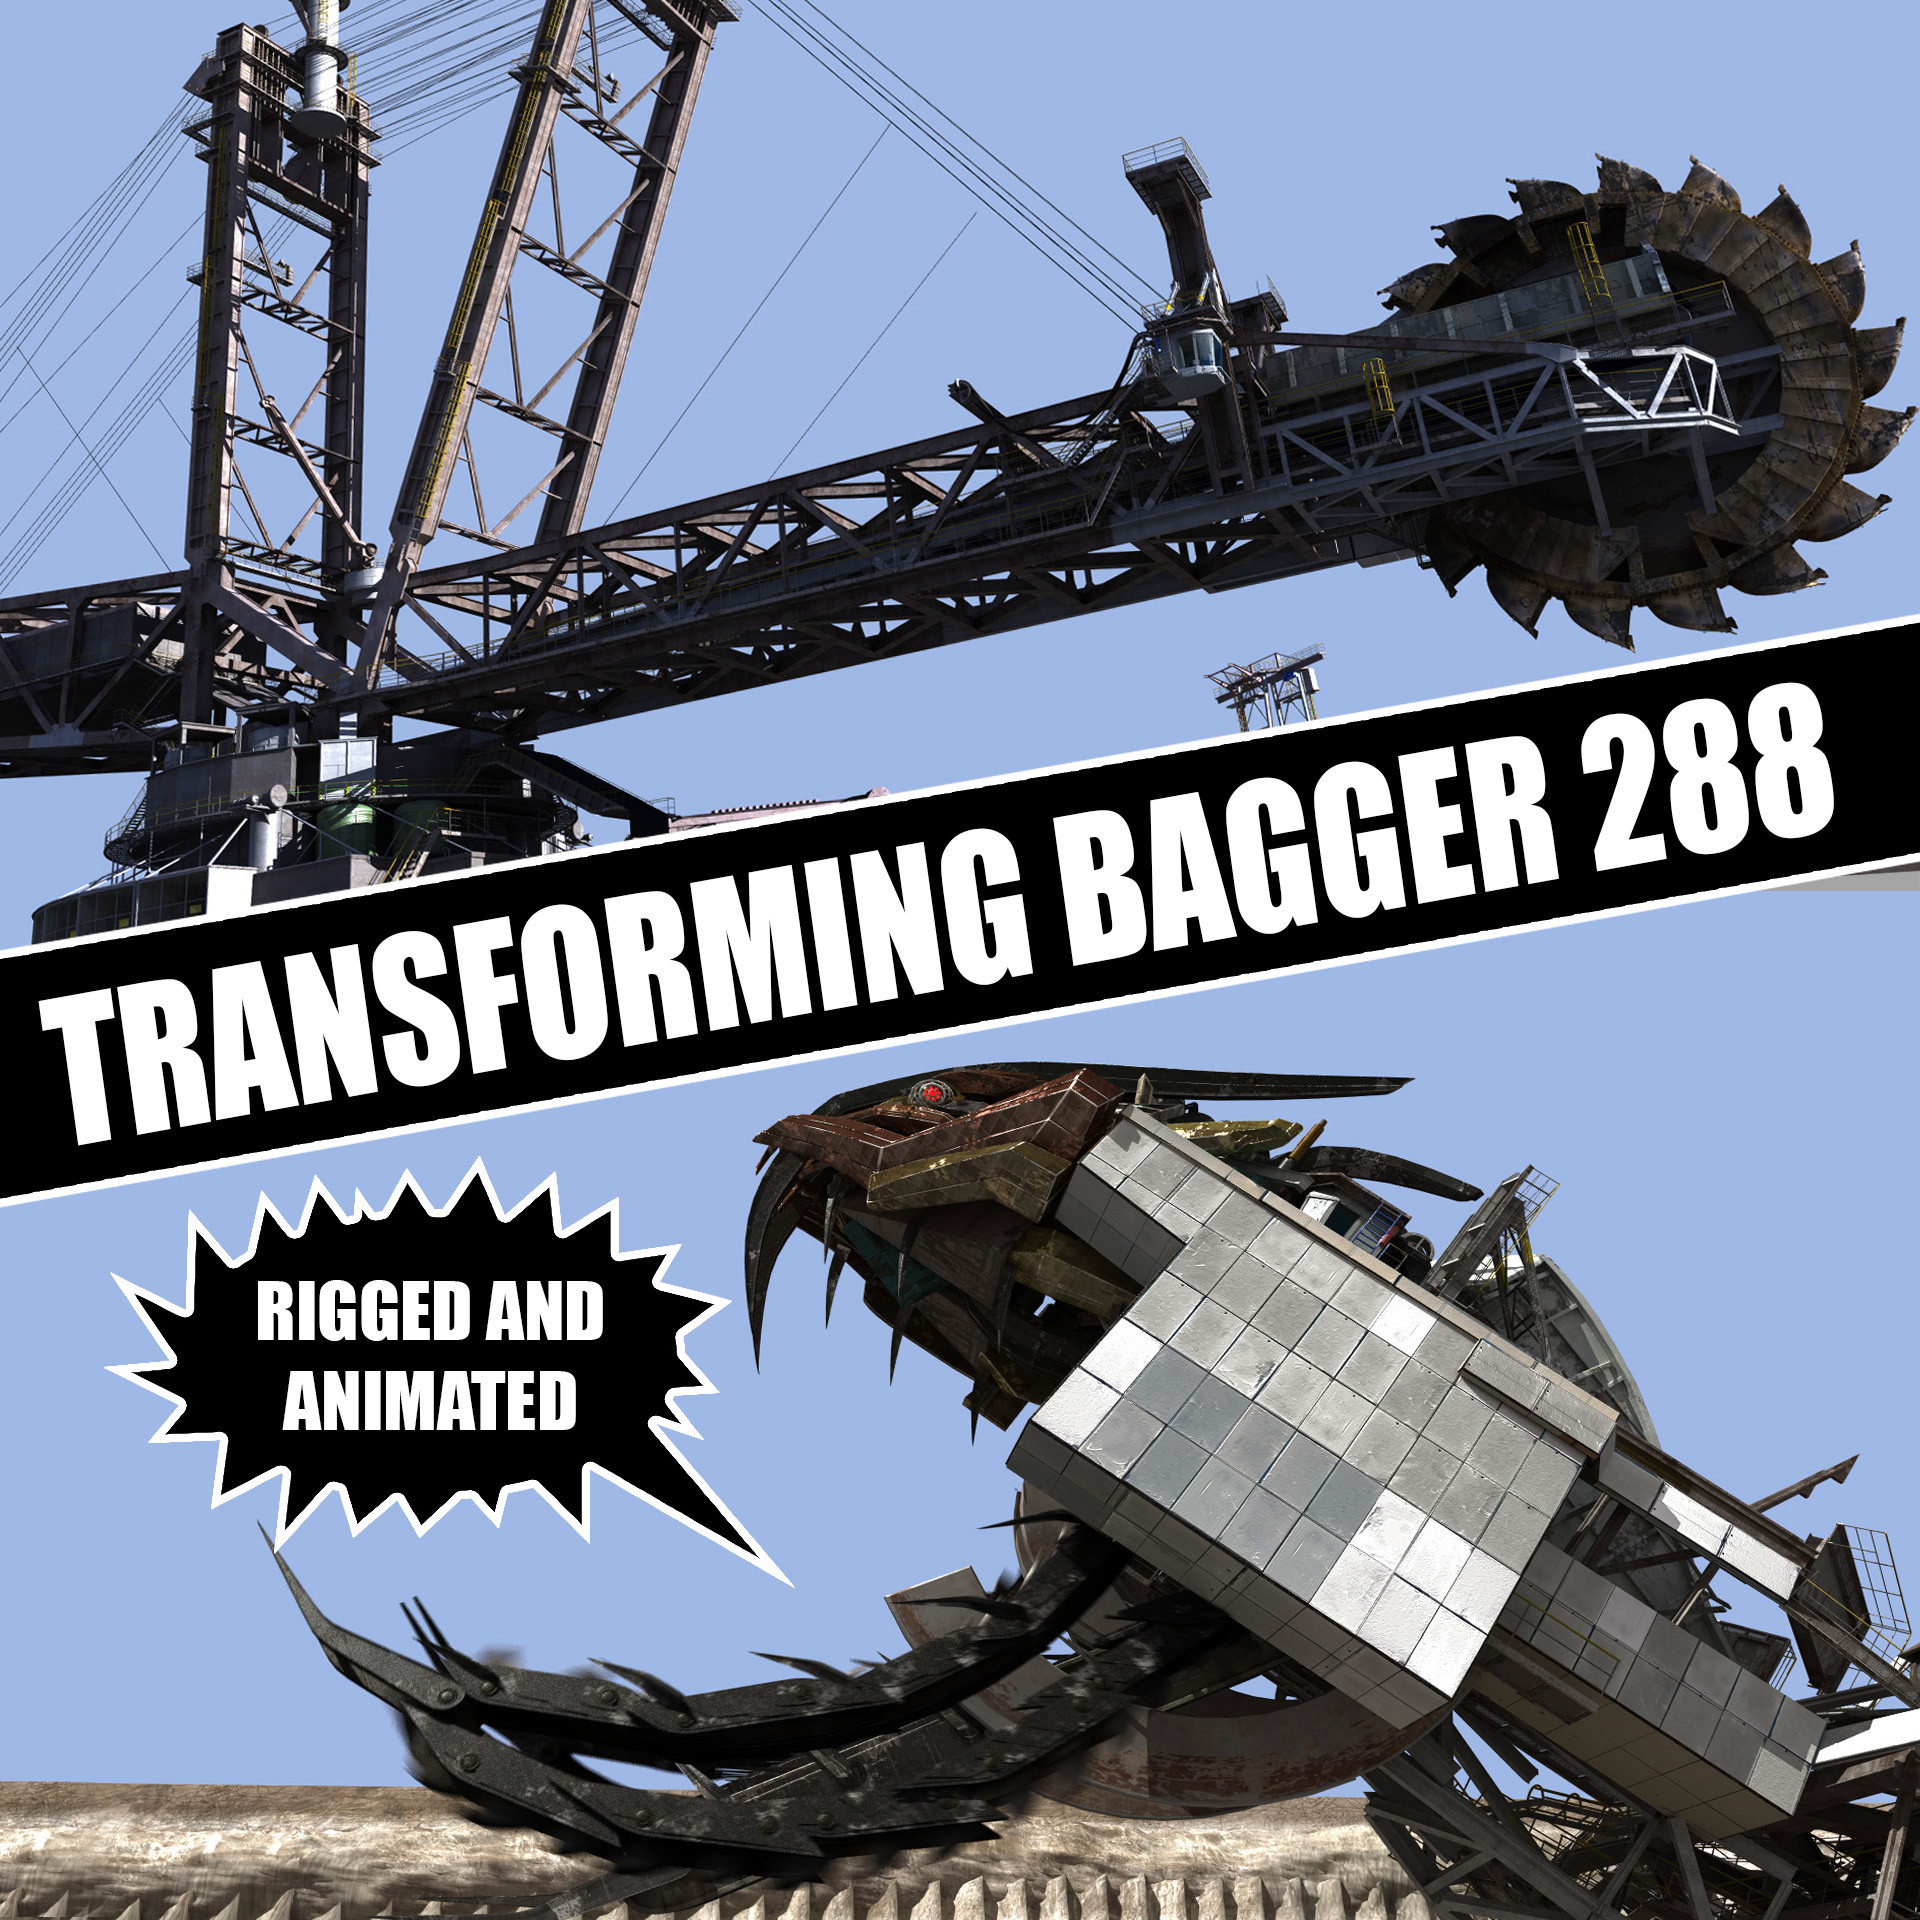 Bagger 288 High Quality Background on Wallpapers Vista